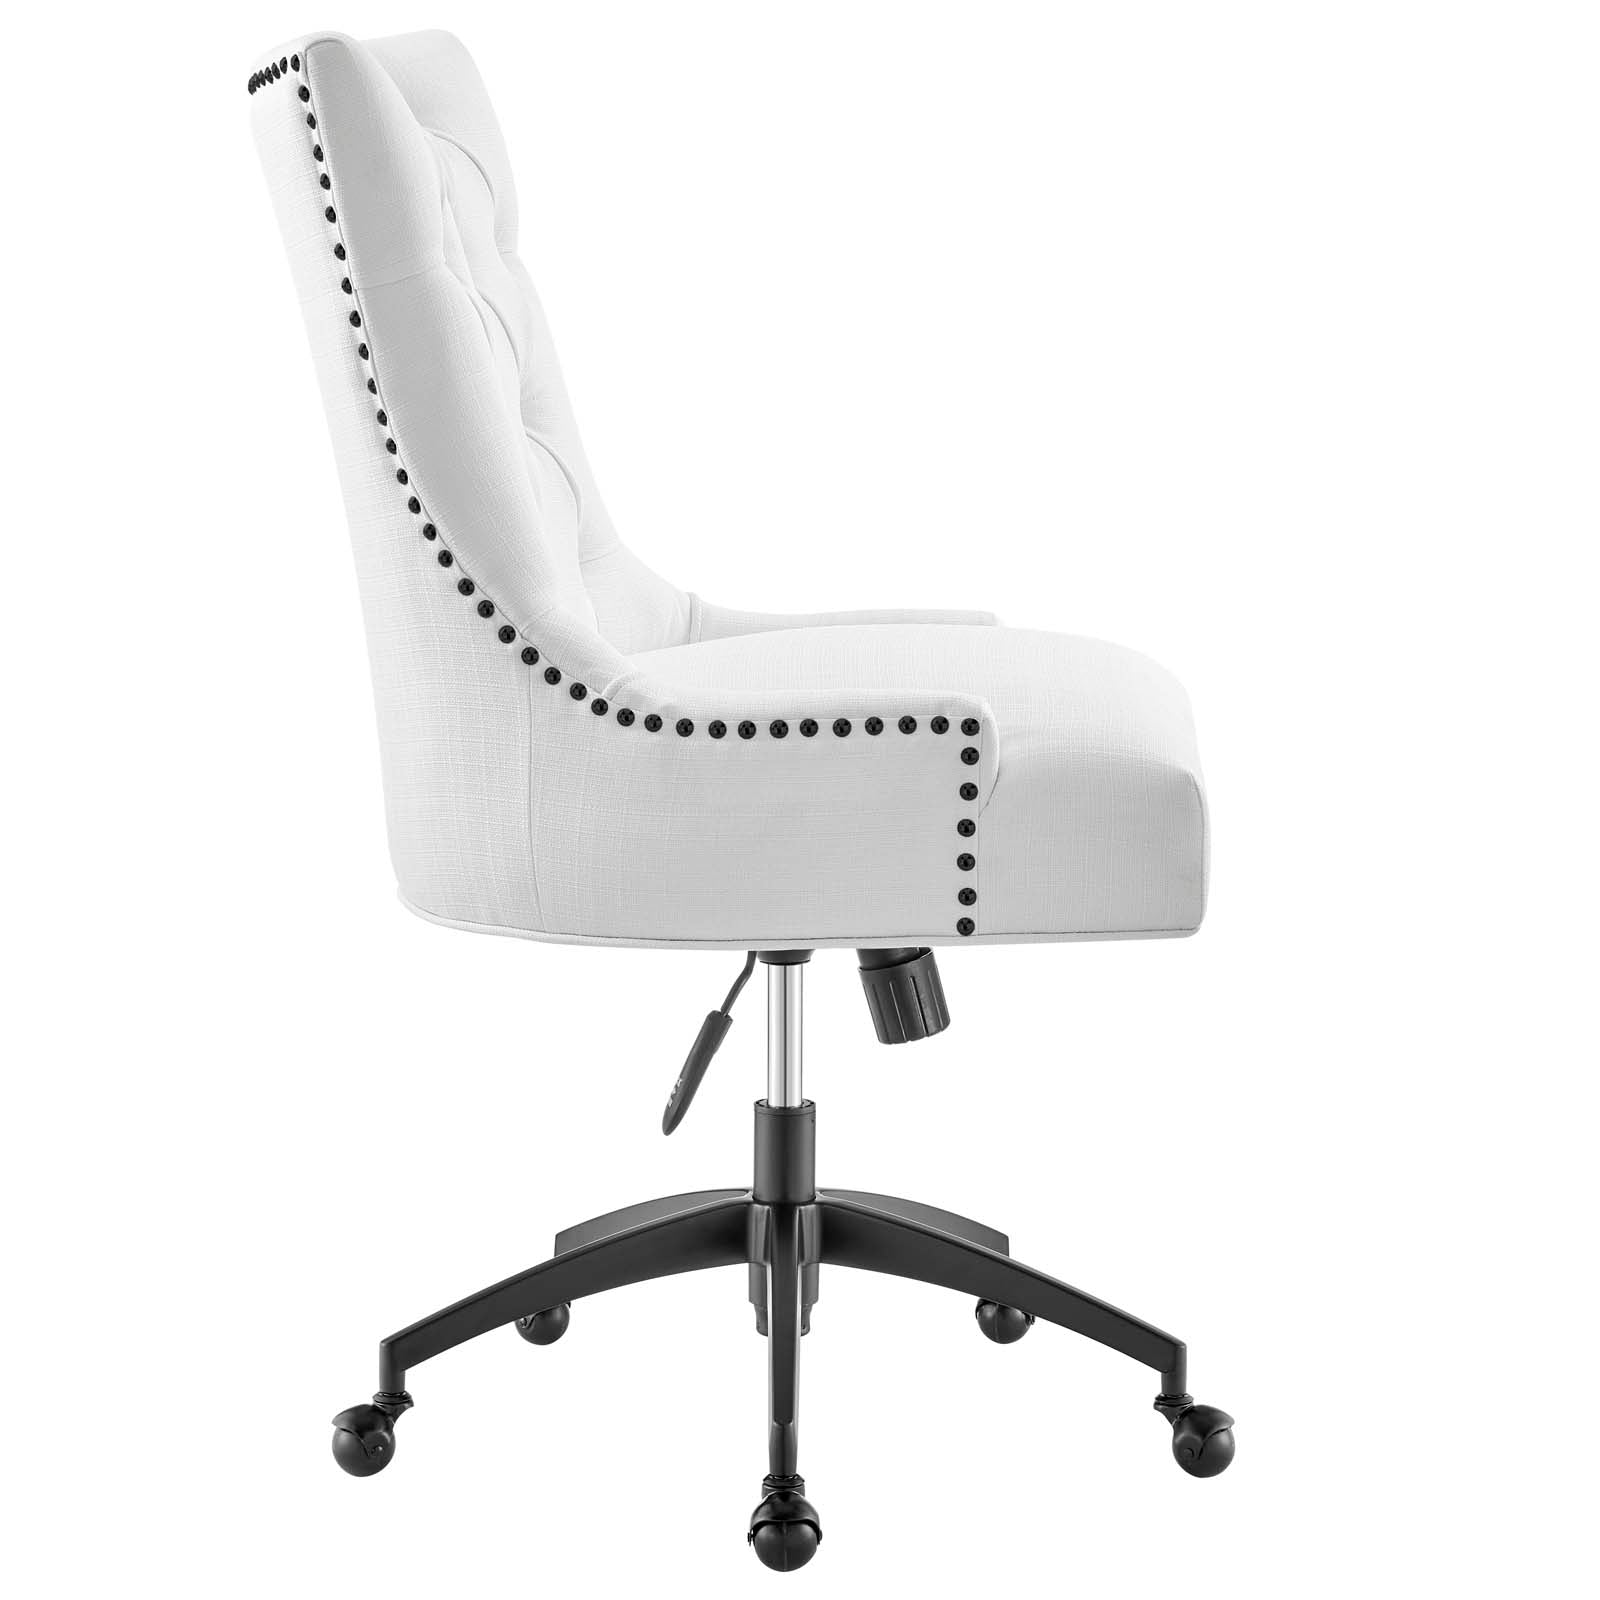 Modway Task Chairs - Regent Tufted Fabric Office Chair Black White